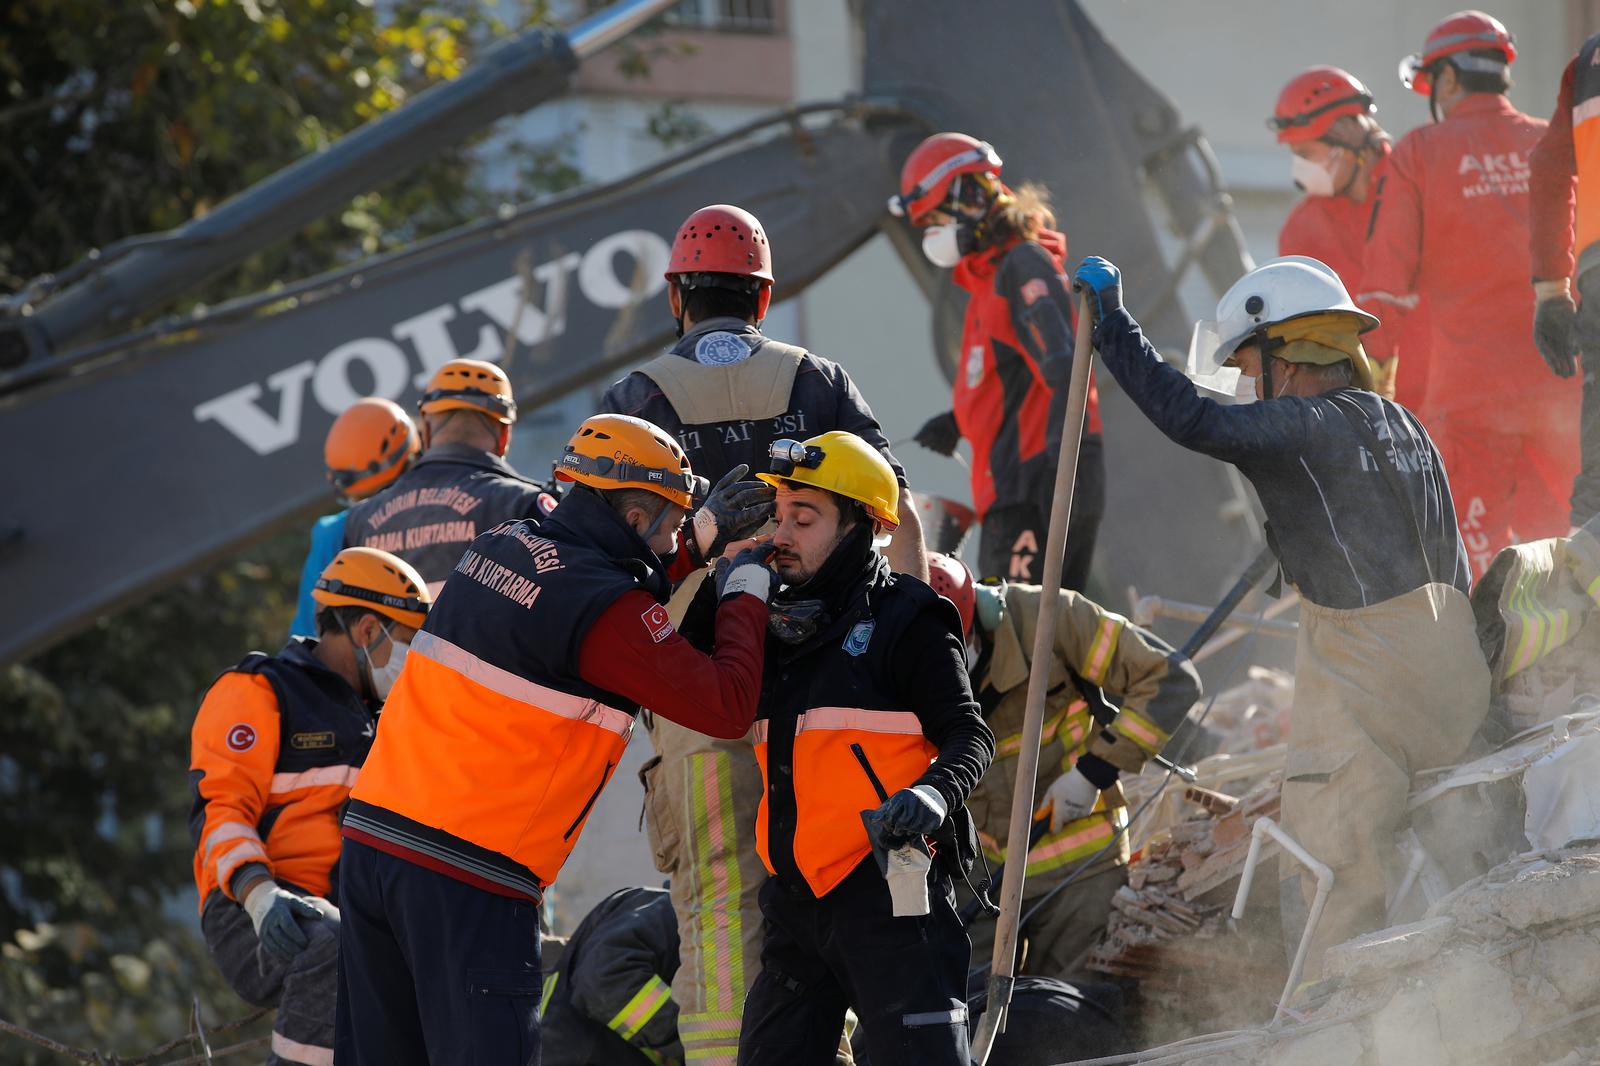 Three-year-old rescued from rubble, Turkey quake death toll hits 81